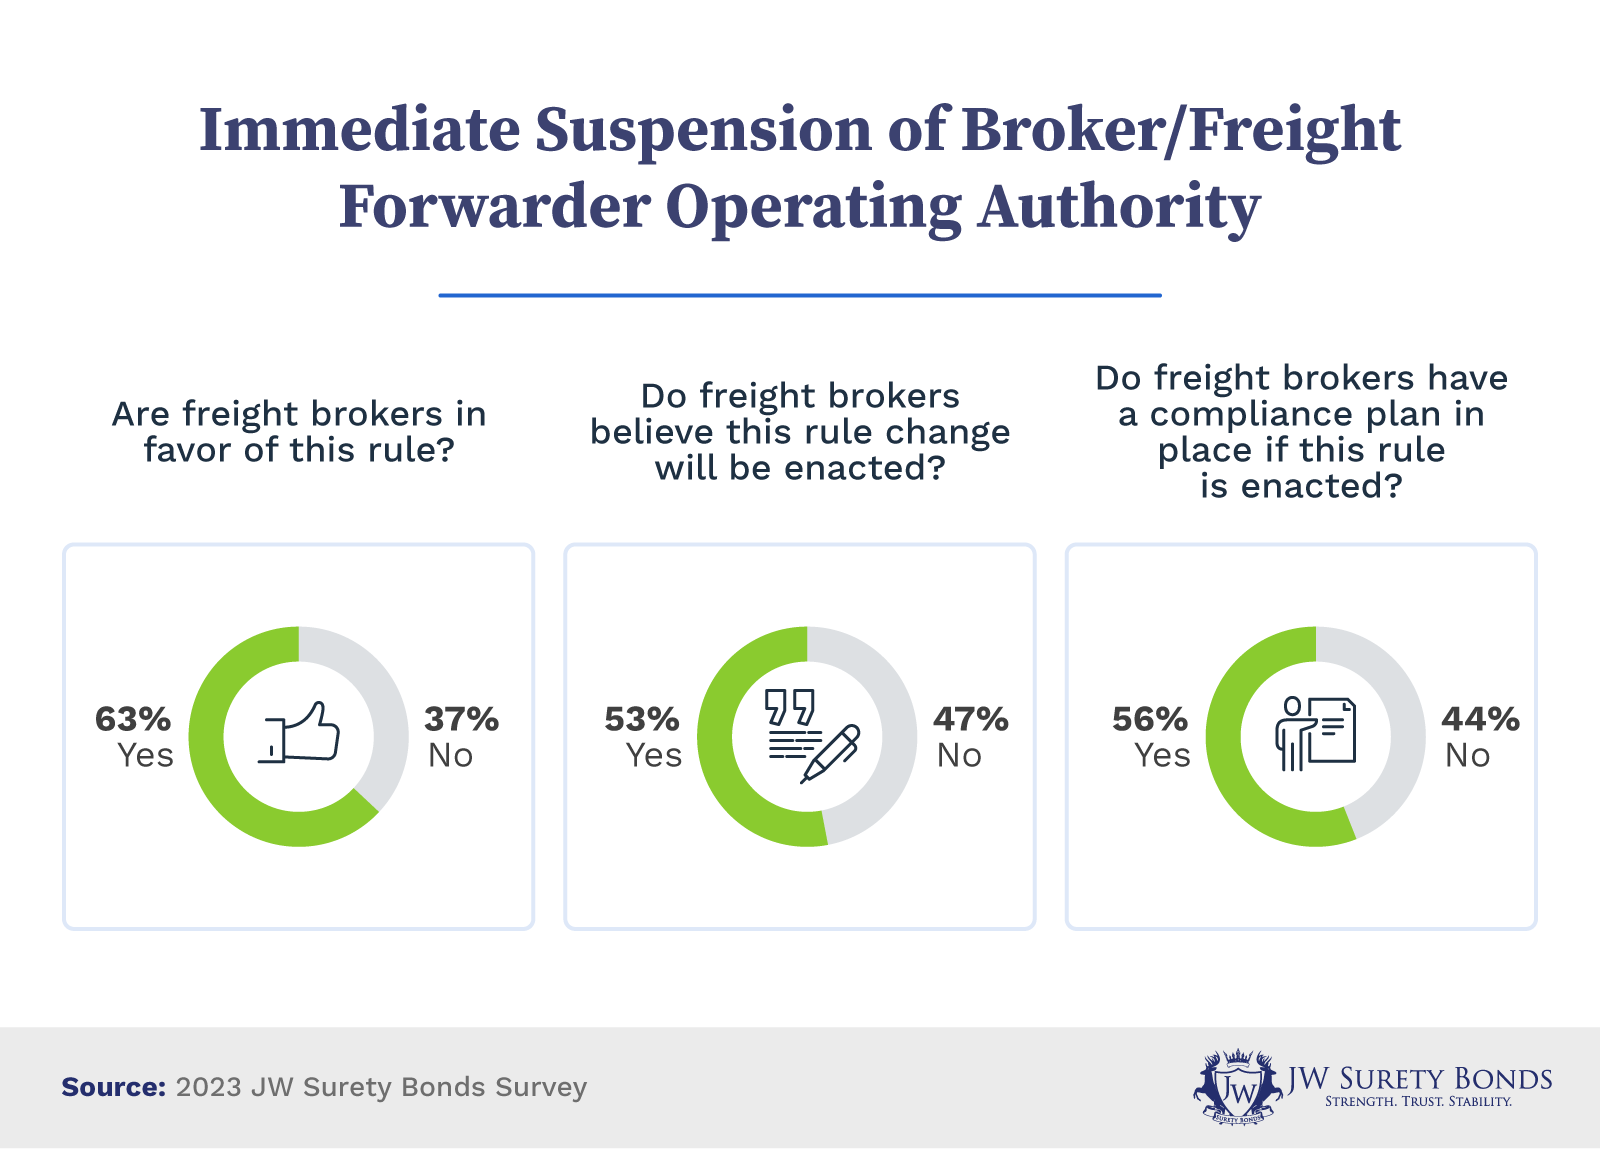 Immediate suspension of broker/freight forwarder operating authority.